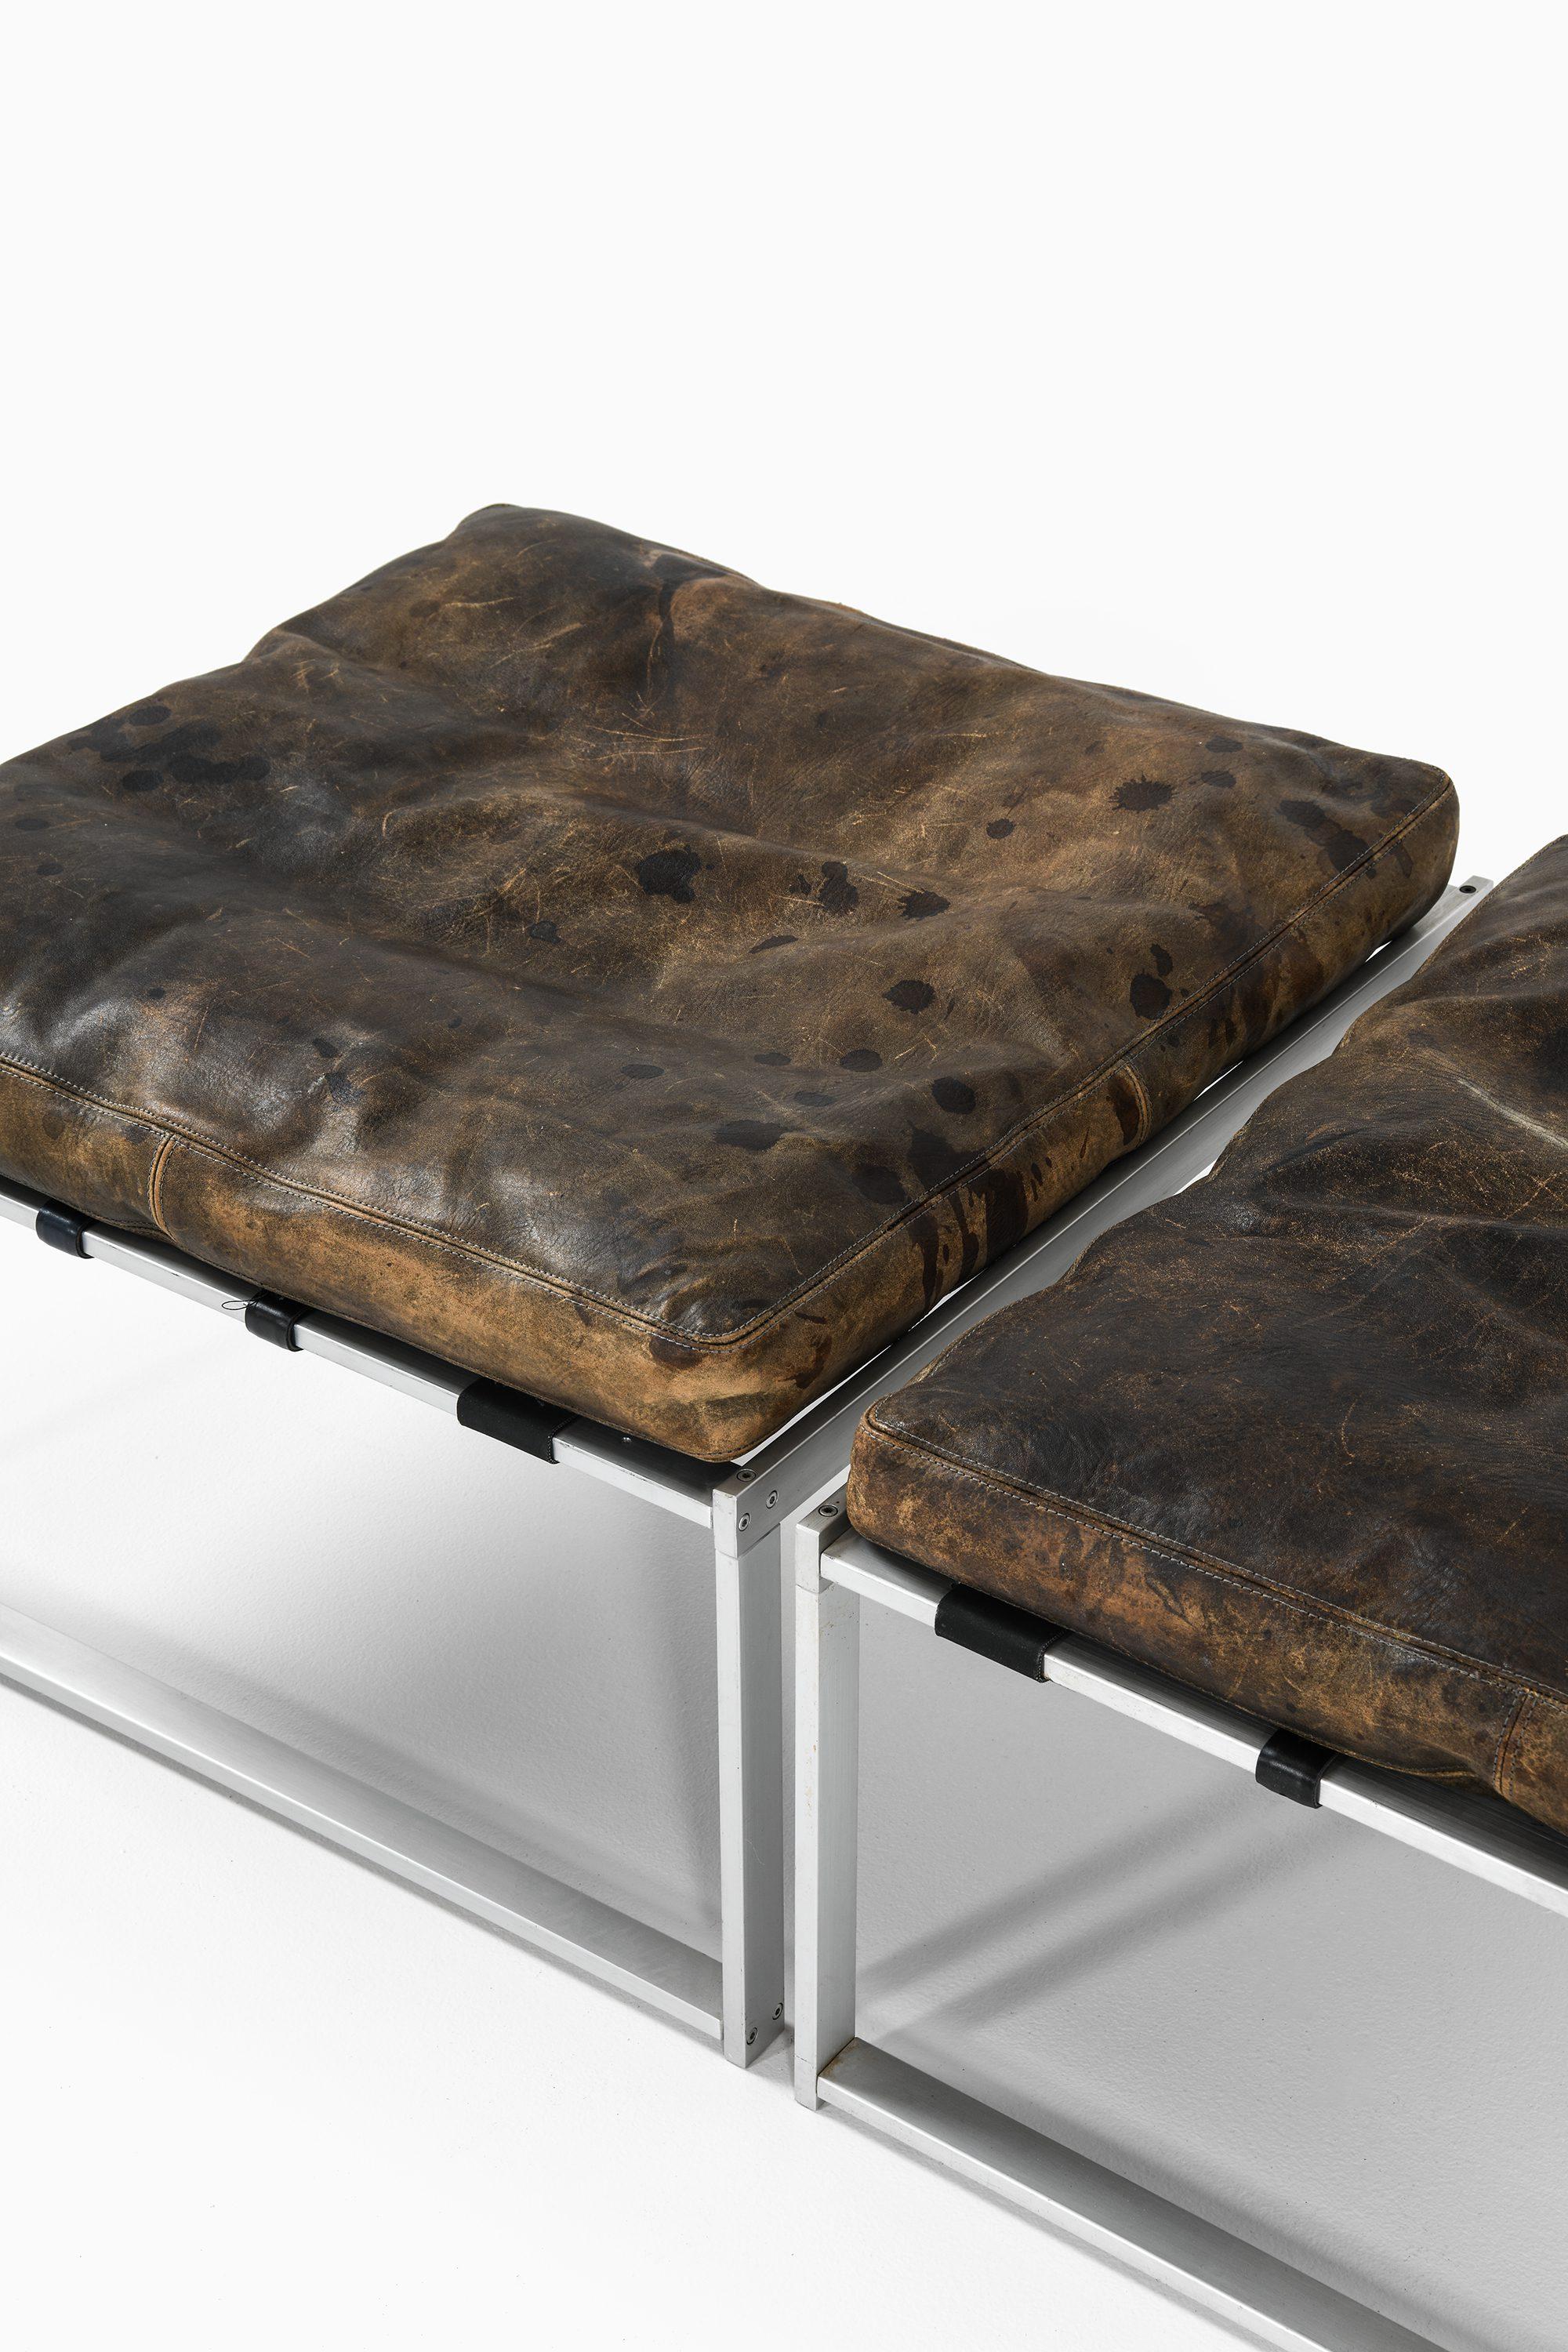 Scandinavian Modern Jörgen Høj Set of 2 Stools & Side Table in Aluminium, Glass and Leather, 1960s For Sale